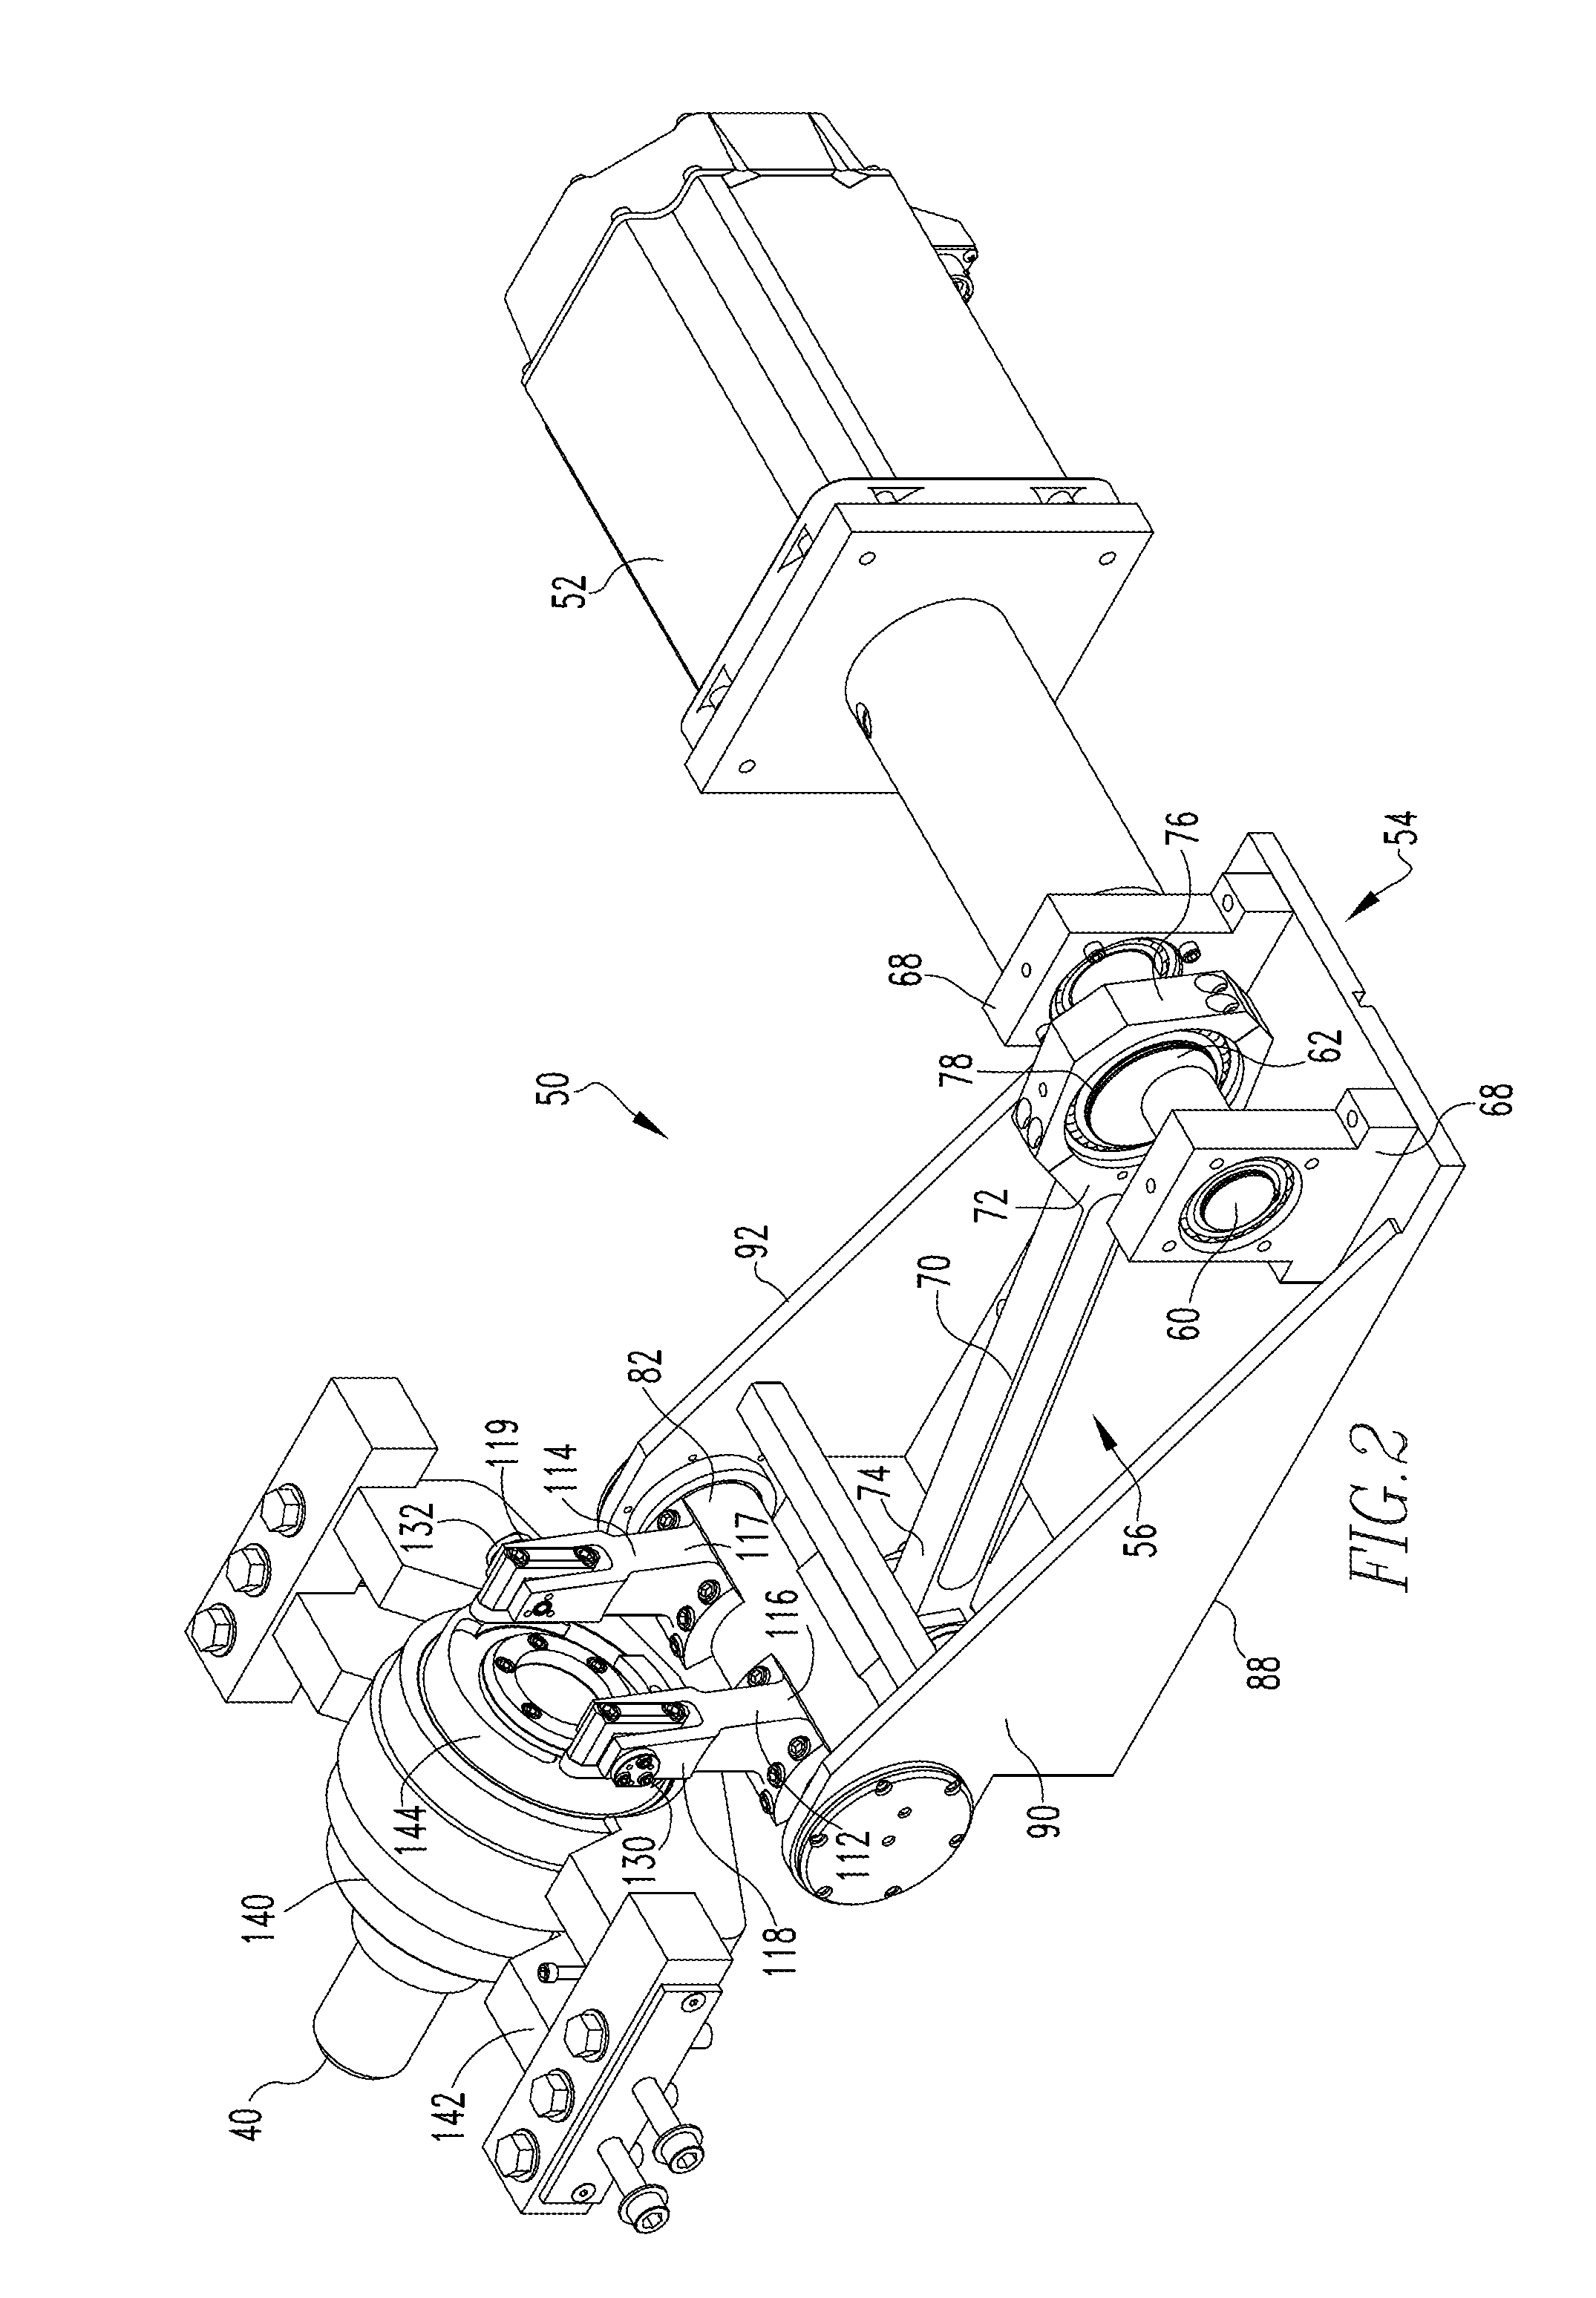 Actuator with variable speed servo motor for redraw assembly